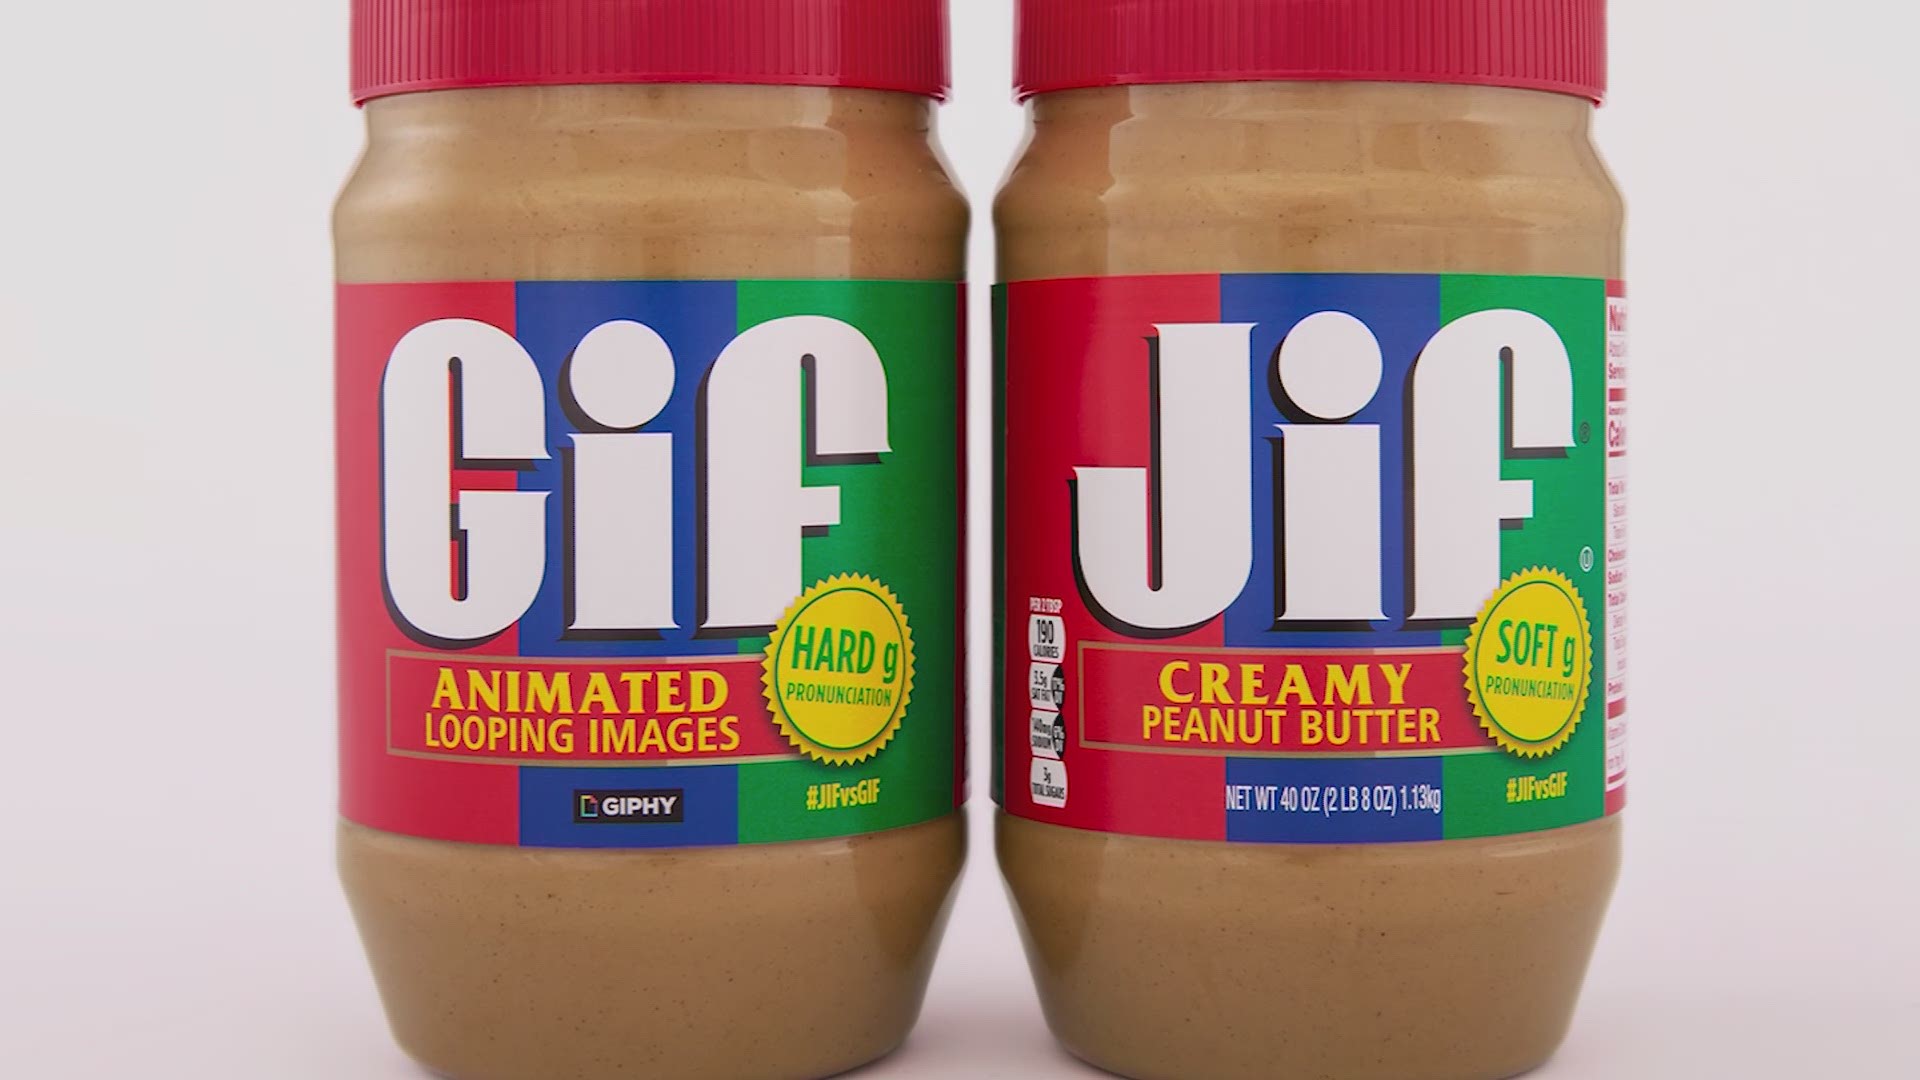 The popular peanut butter brand Jif is releasing a jar featuring the name spelled with a "g" instead of a "j."